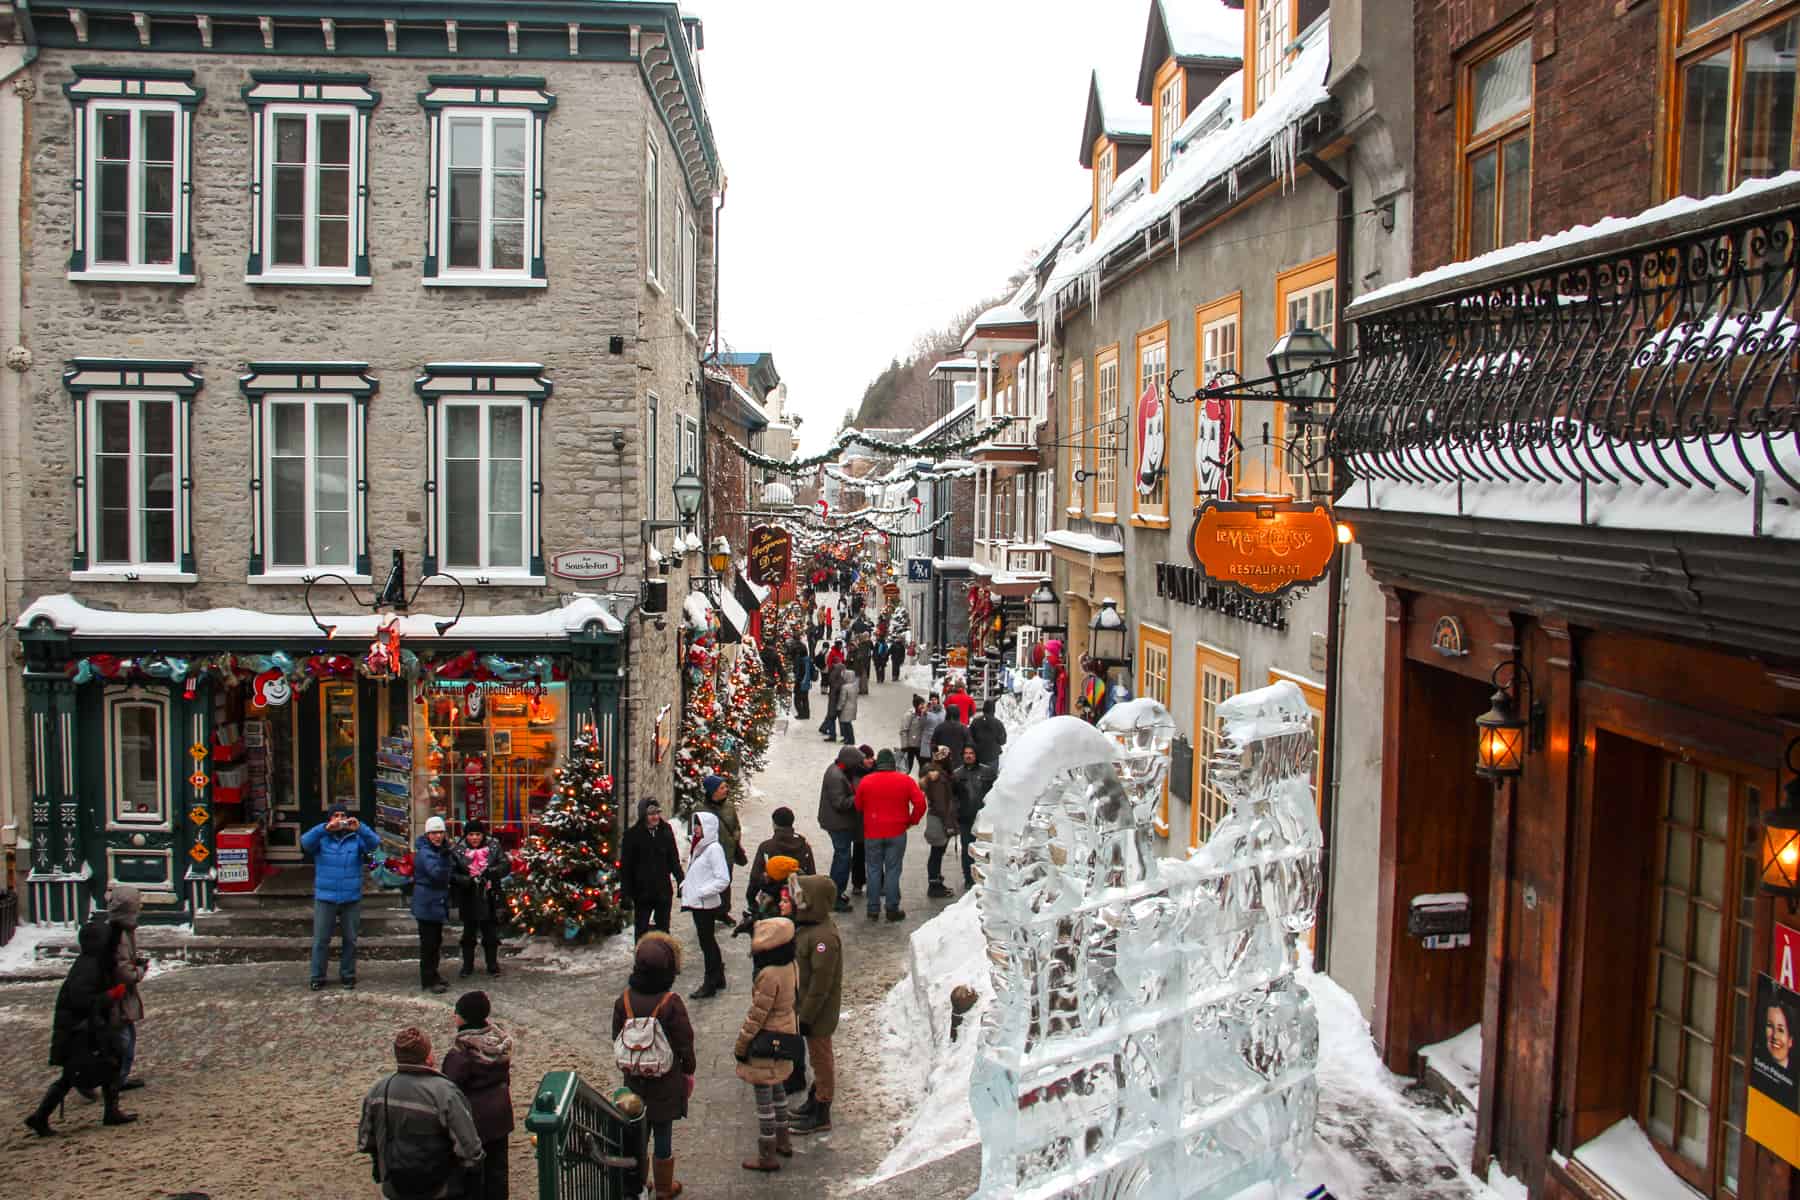 People walking on the streets of old Quebec city in winter, where balconies are covered in snow and an ice sculpture stands in front of a store. 